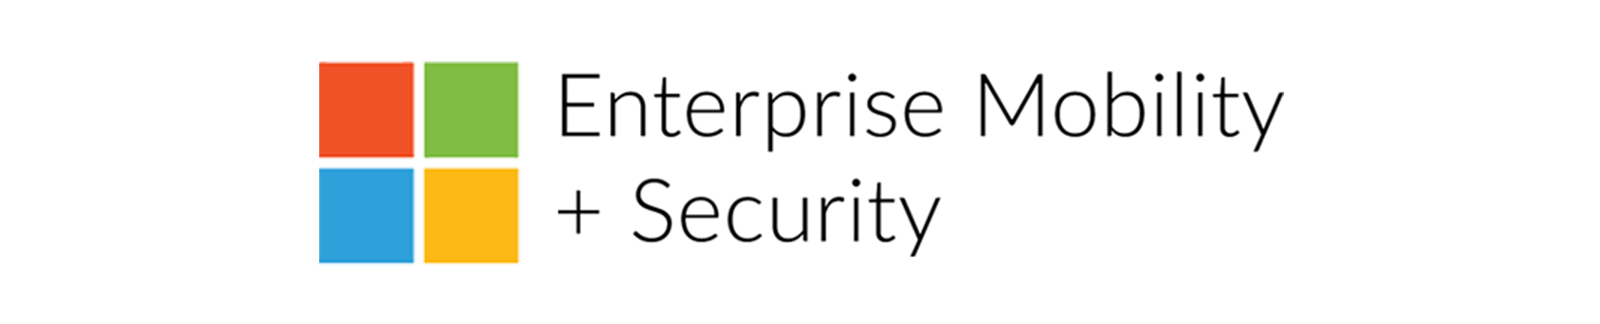 Enterprise Mobility and Security logo